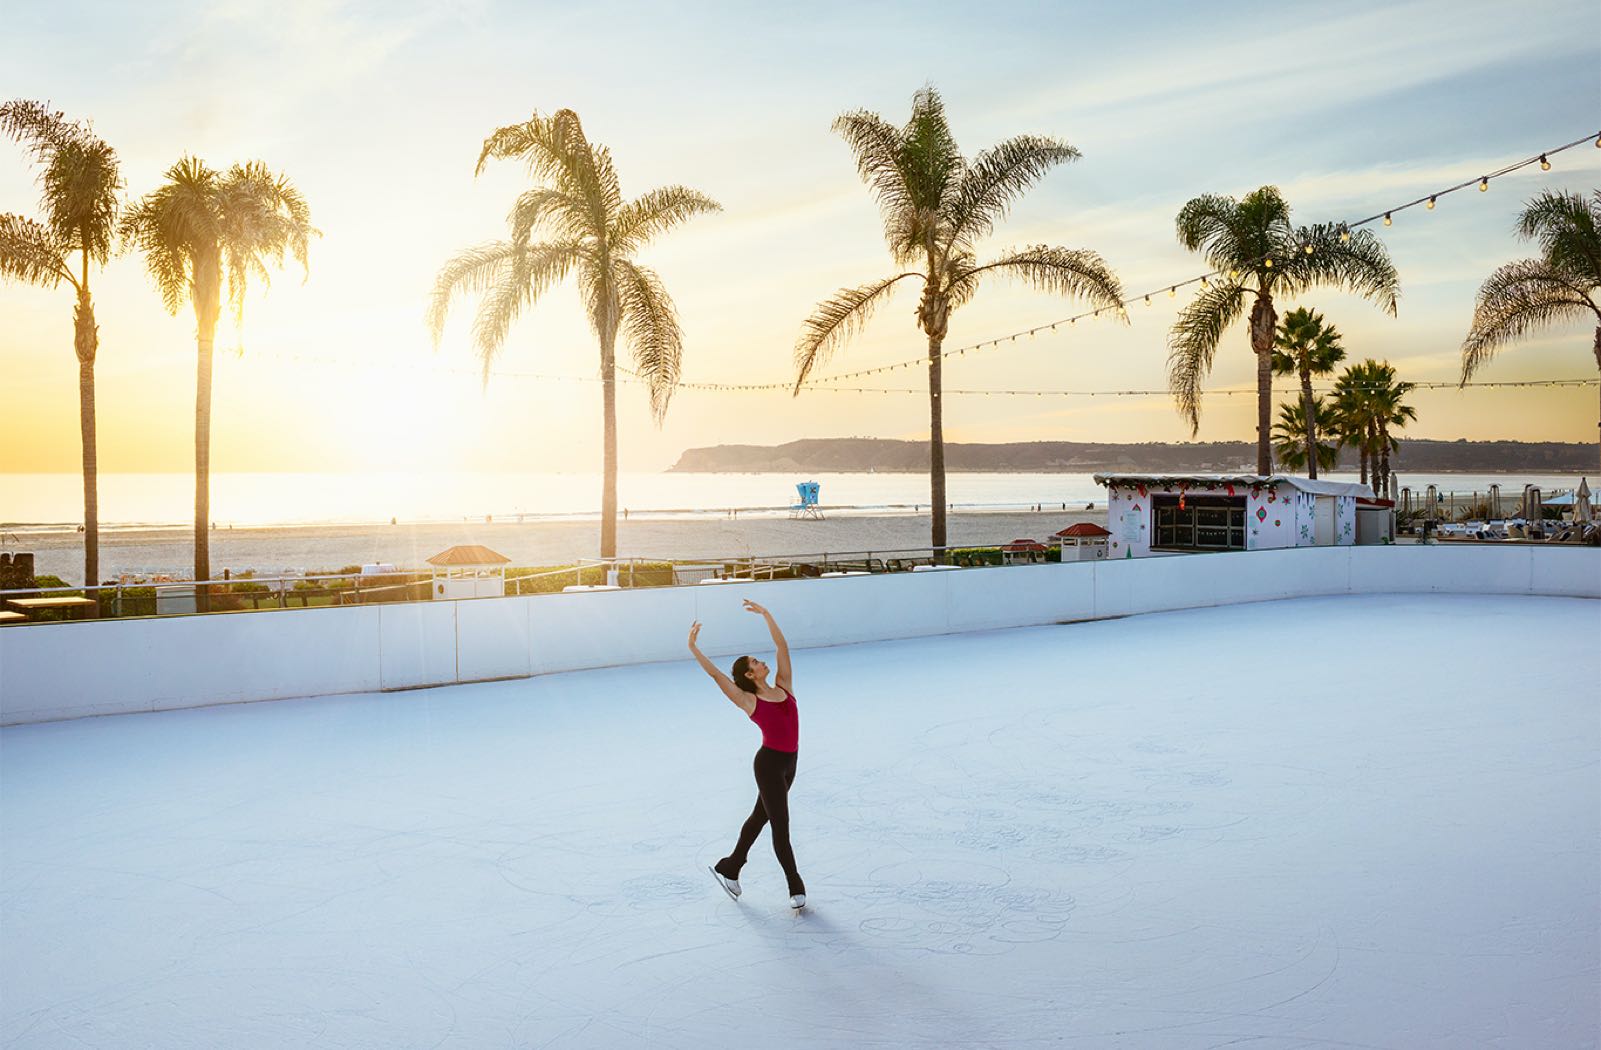 Ice Skater at the Hotel Del Coronado's Skating by the Sea - Top Things to Do in San Diego